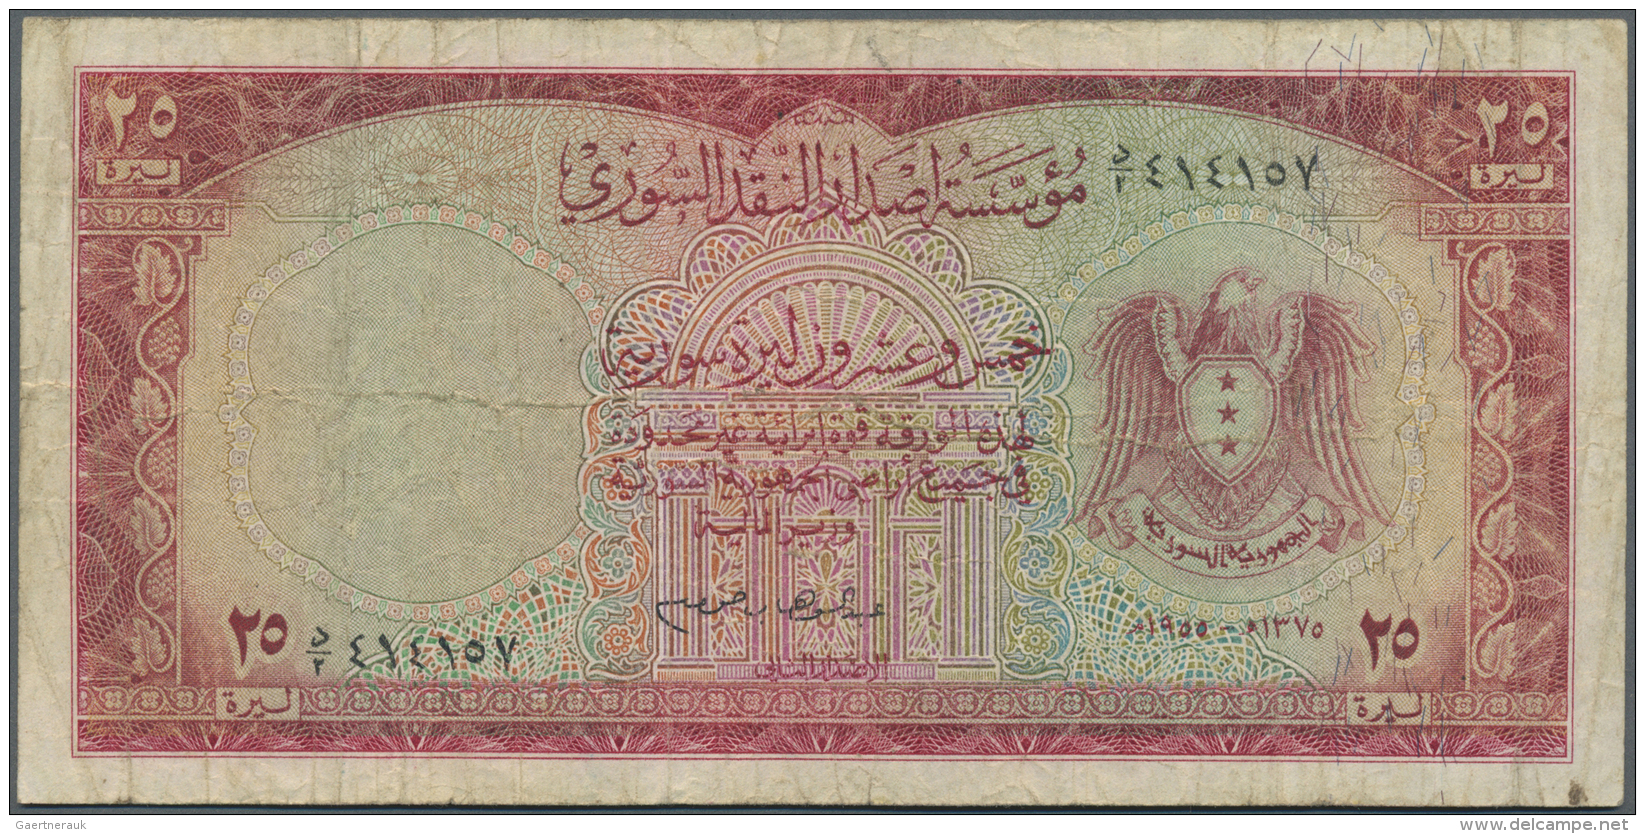 Syria / Syrien: 25 Livres ND(1955) P. 78B, Stronger Used With Several Folds And Creases, Stained Paper, 2 Small Pinholes - Siria